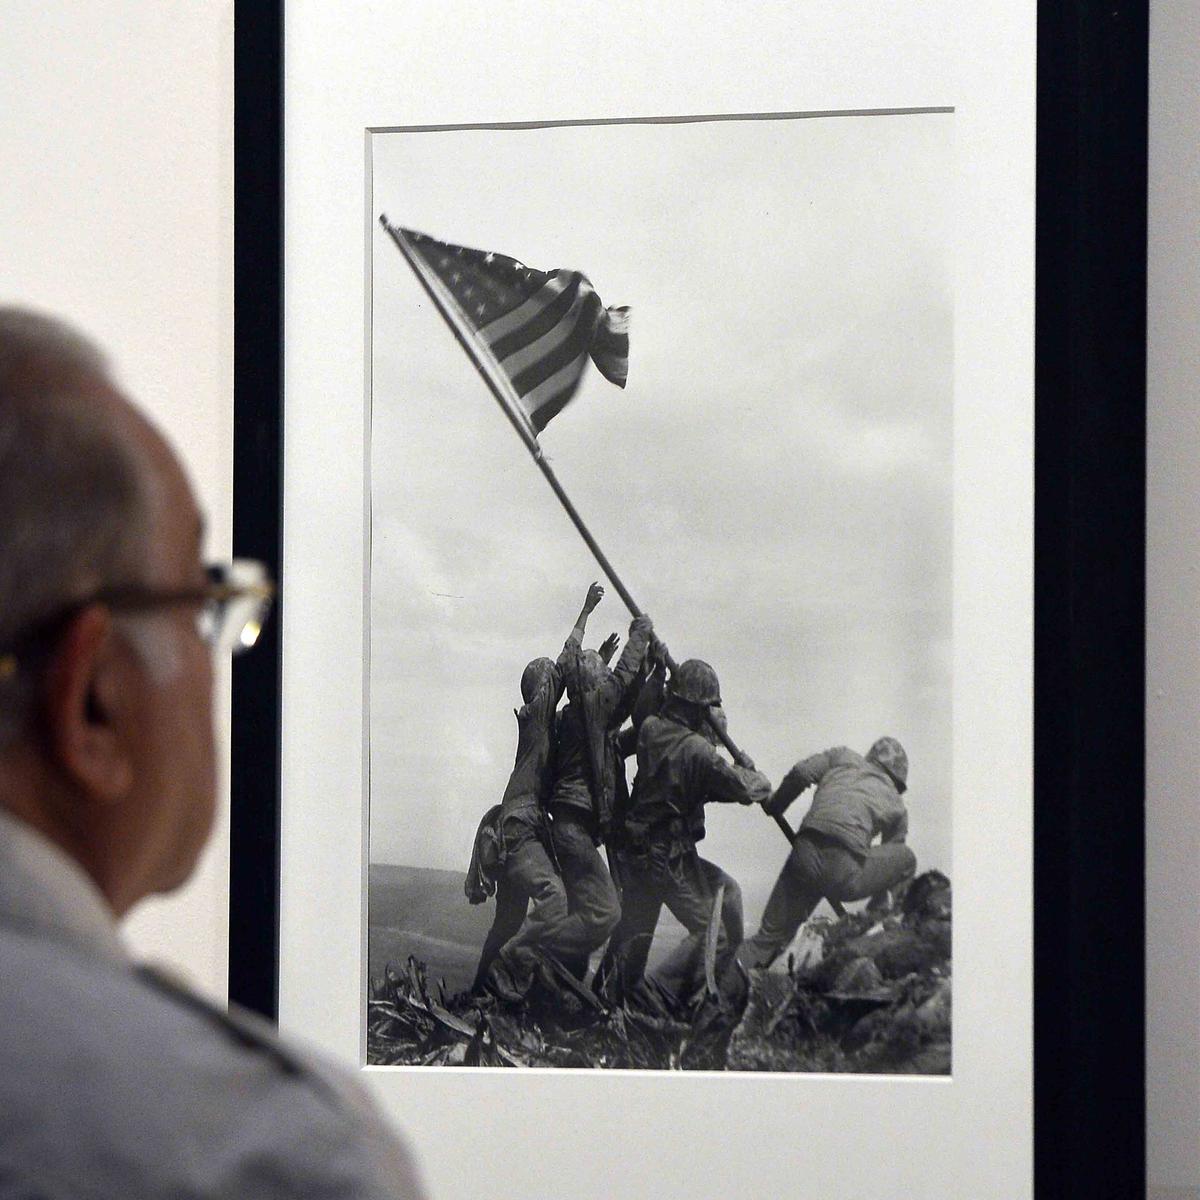 A visitor looks at Joe Rosenthal's "Raising the Flag on Iwo Jima" 1945 during the "Life. I grandi fotografi" (Life. The great photographers) exhibition at the auditorium on April 30, 2013, in Rome. (GABRIEL BOUYS/AFP via Getty Images)